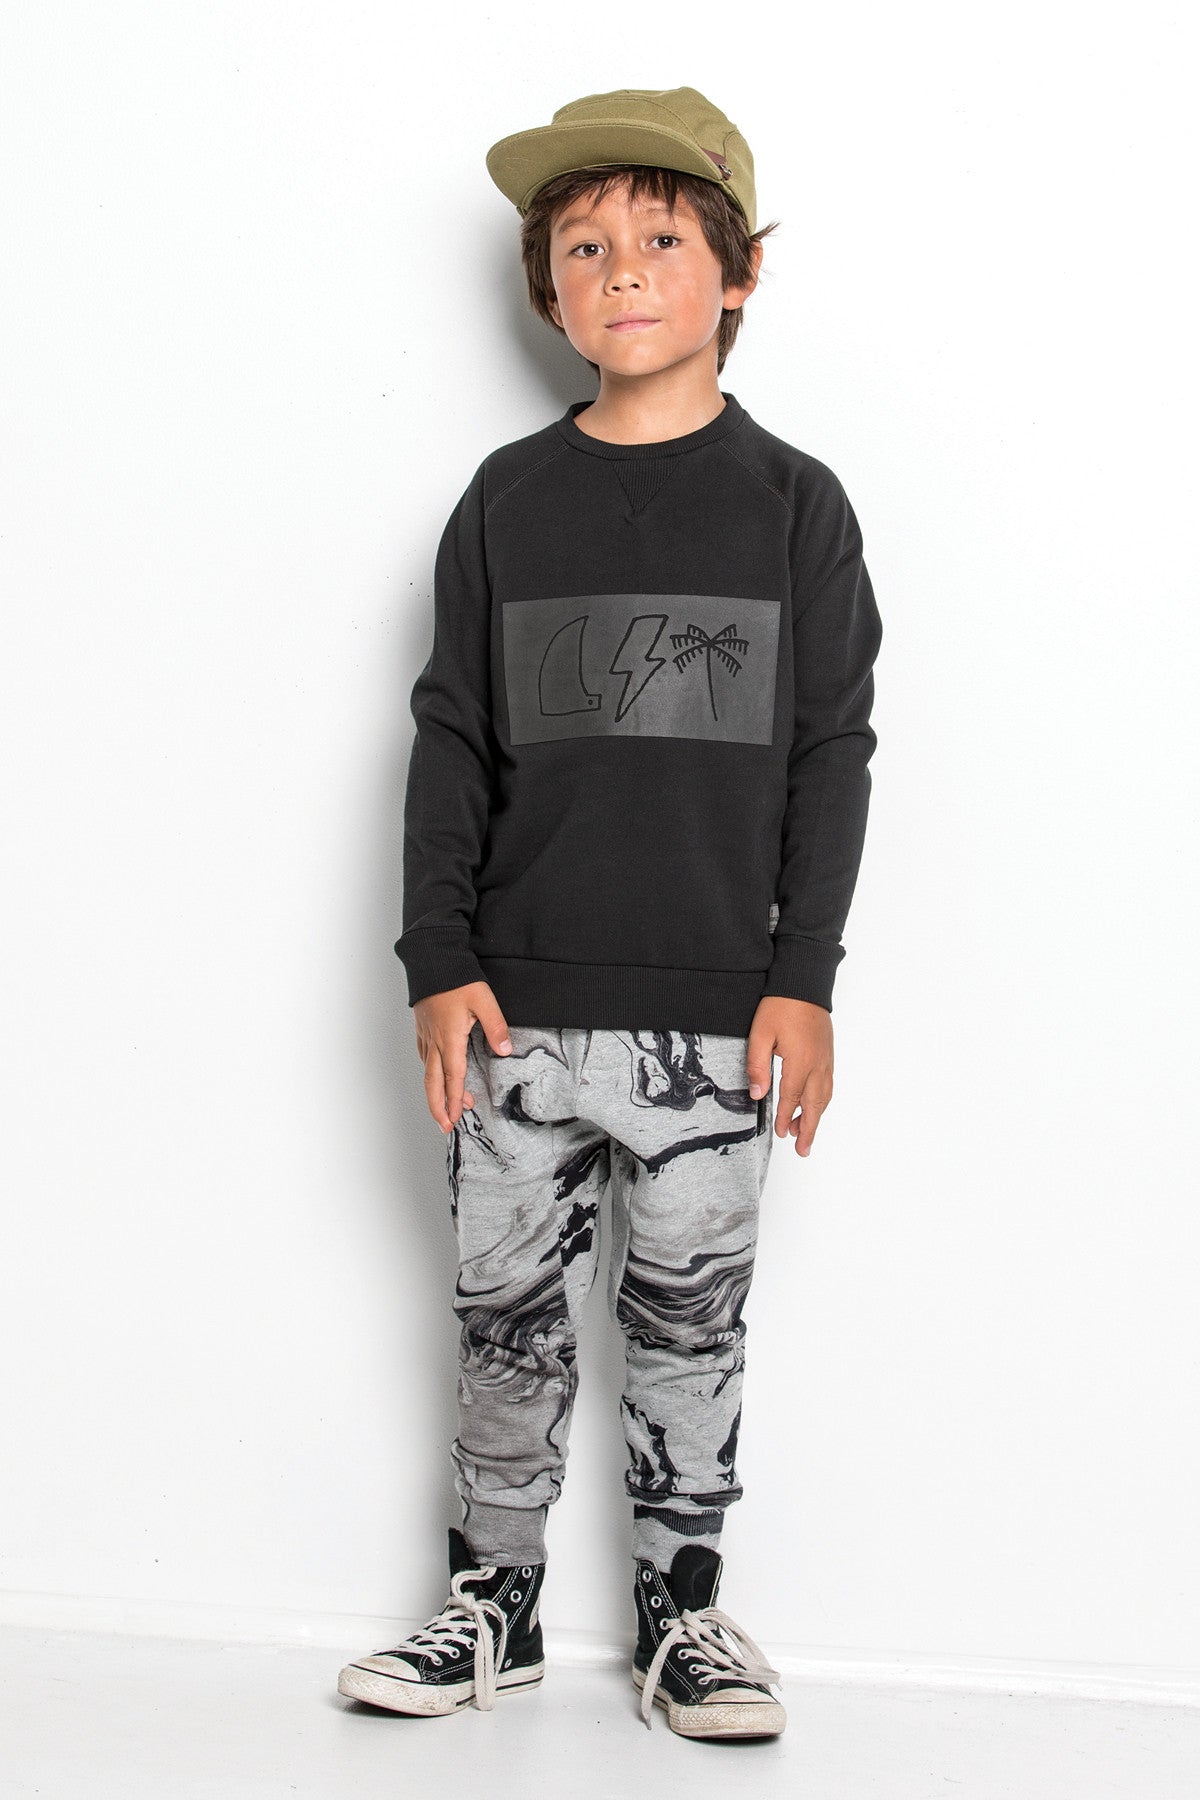 New Styles for Boys - Mini Ruby